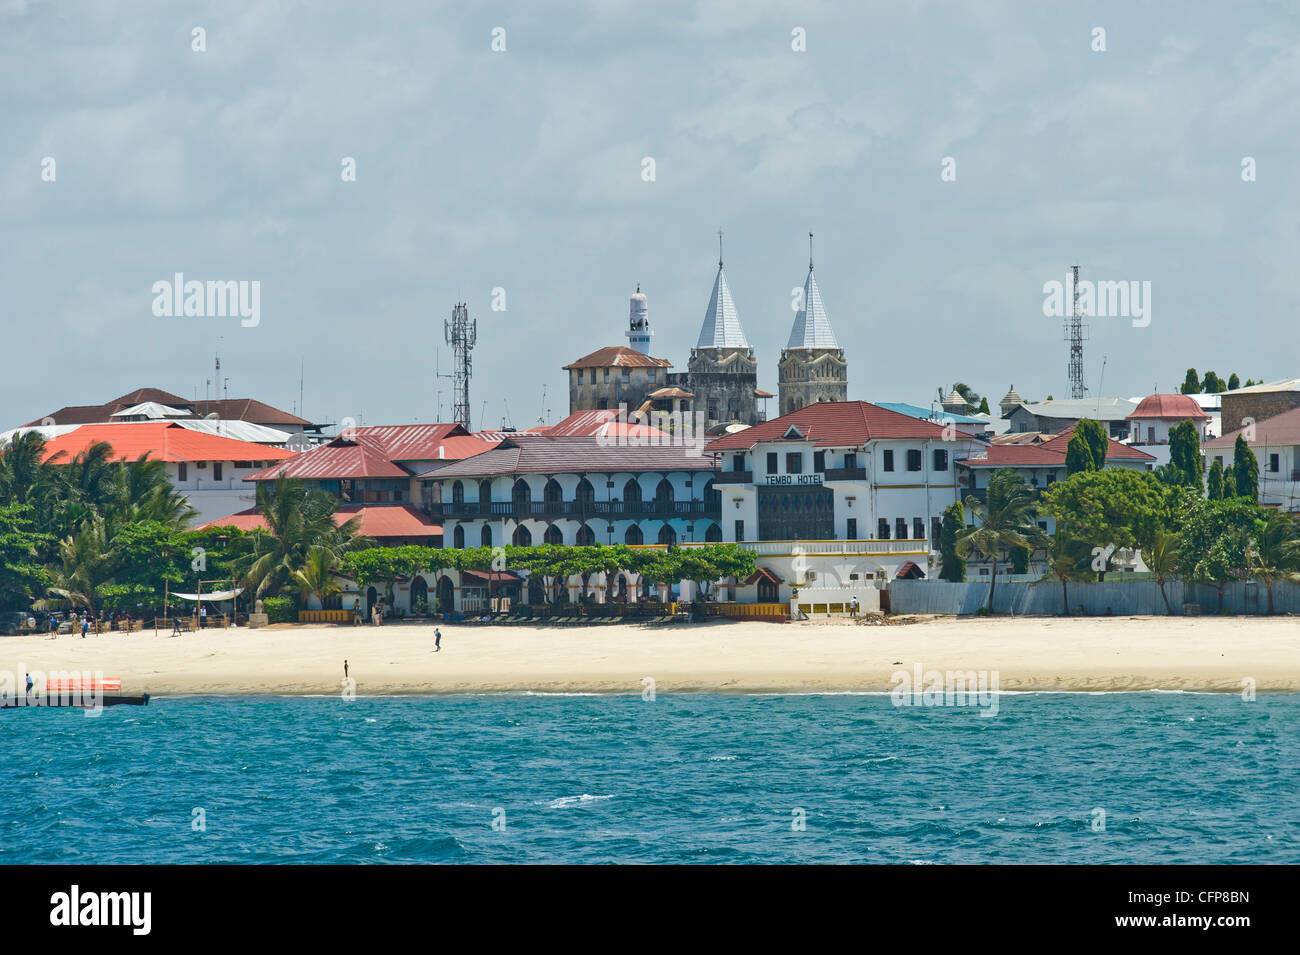 Tembo Hotel und Towers of Anglican Cathedral in Stone Town Sansibar Tansania Stockfoto